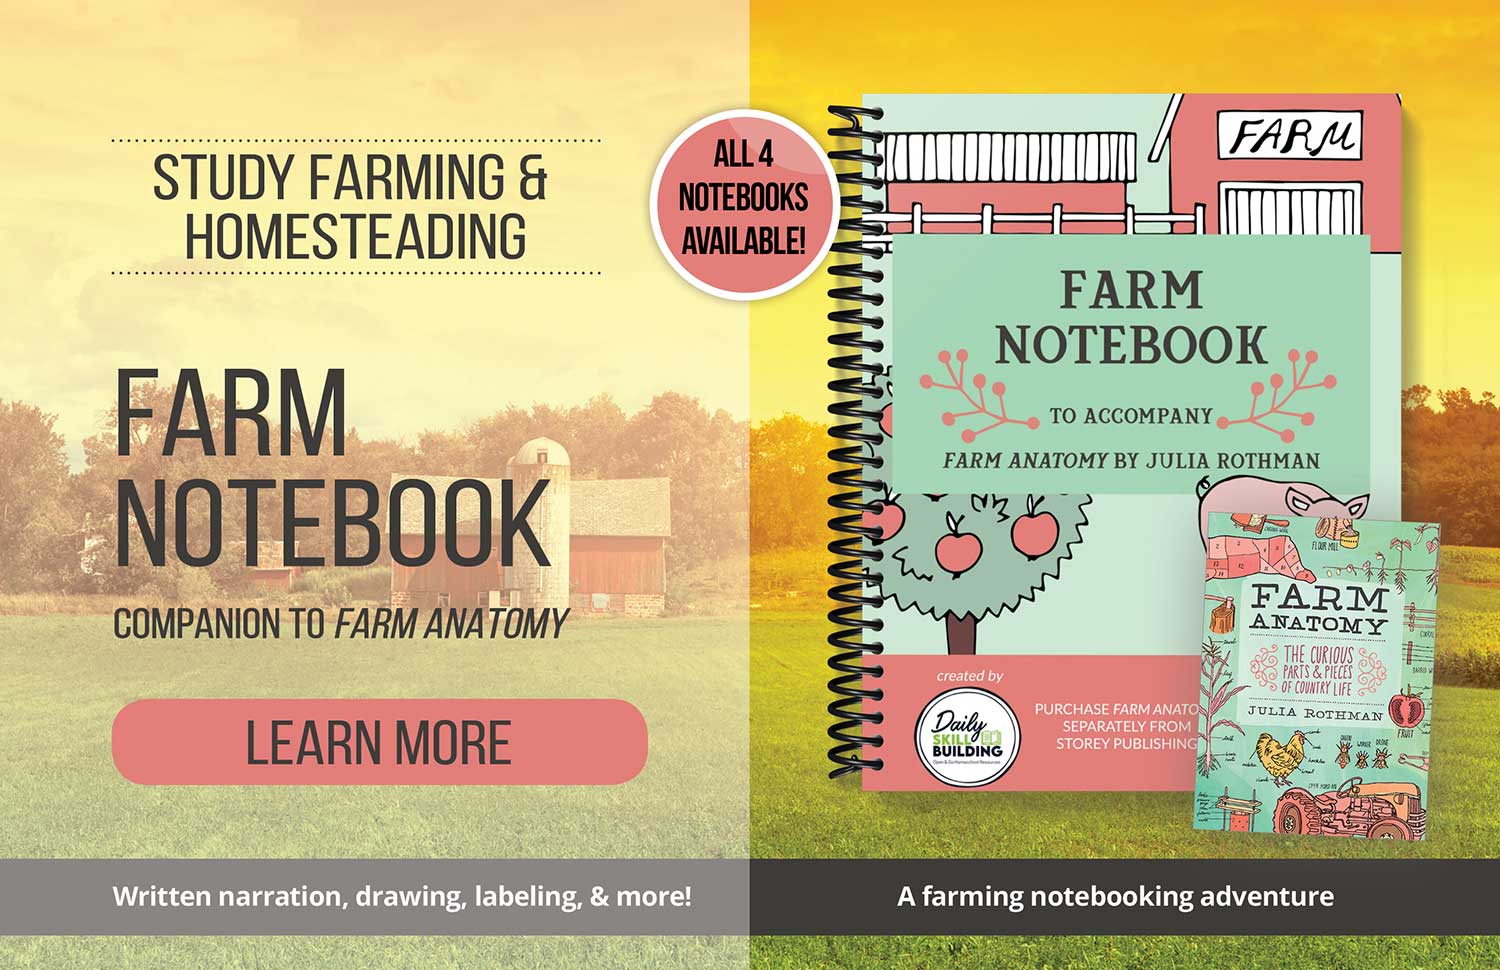 Daily Skill Building Farm Notebook Advertisement